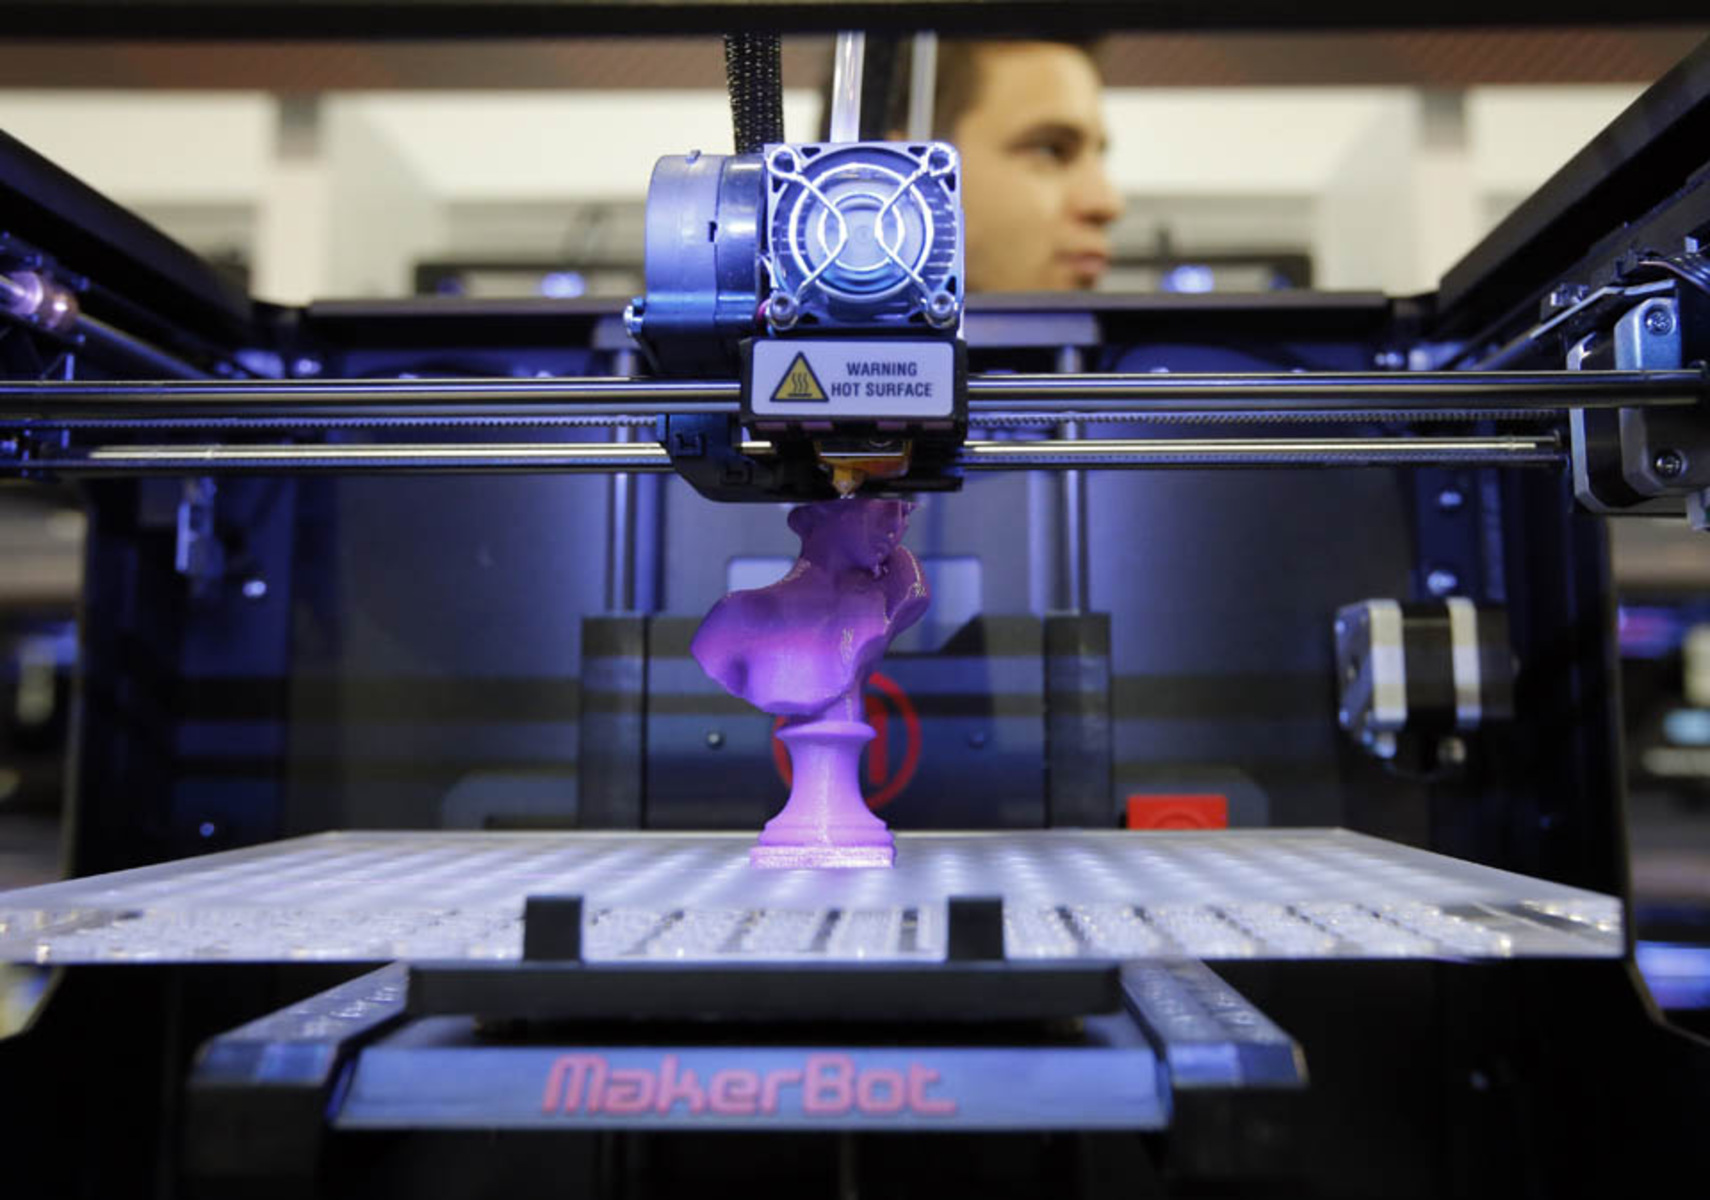 Why Do We Use 3D Printing